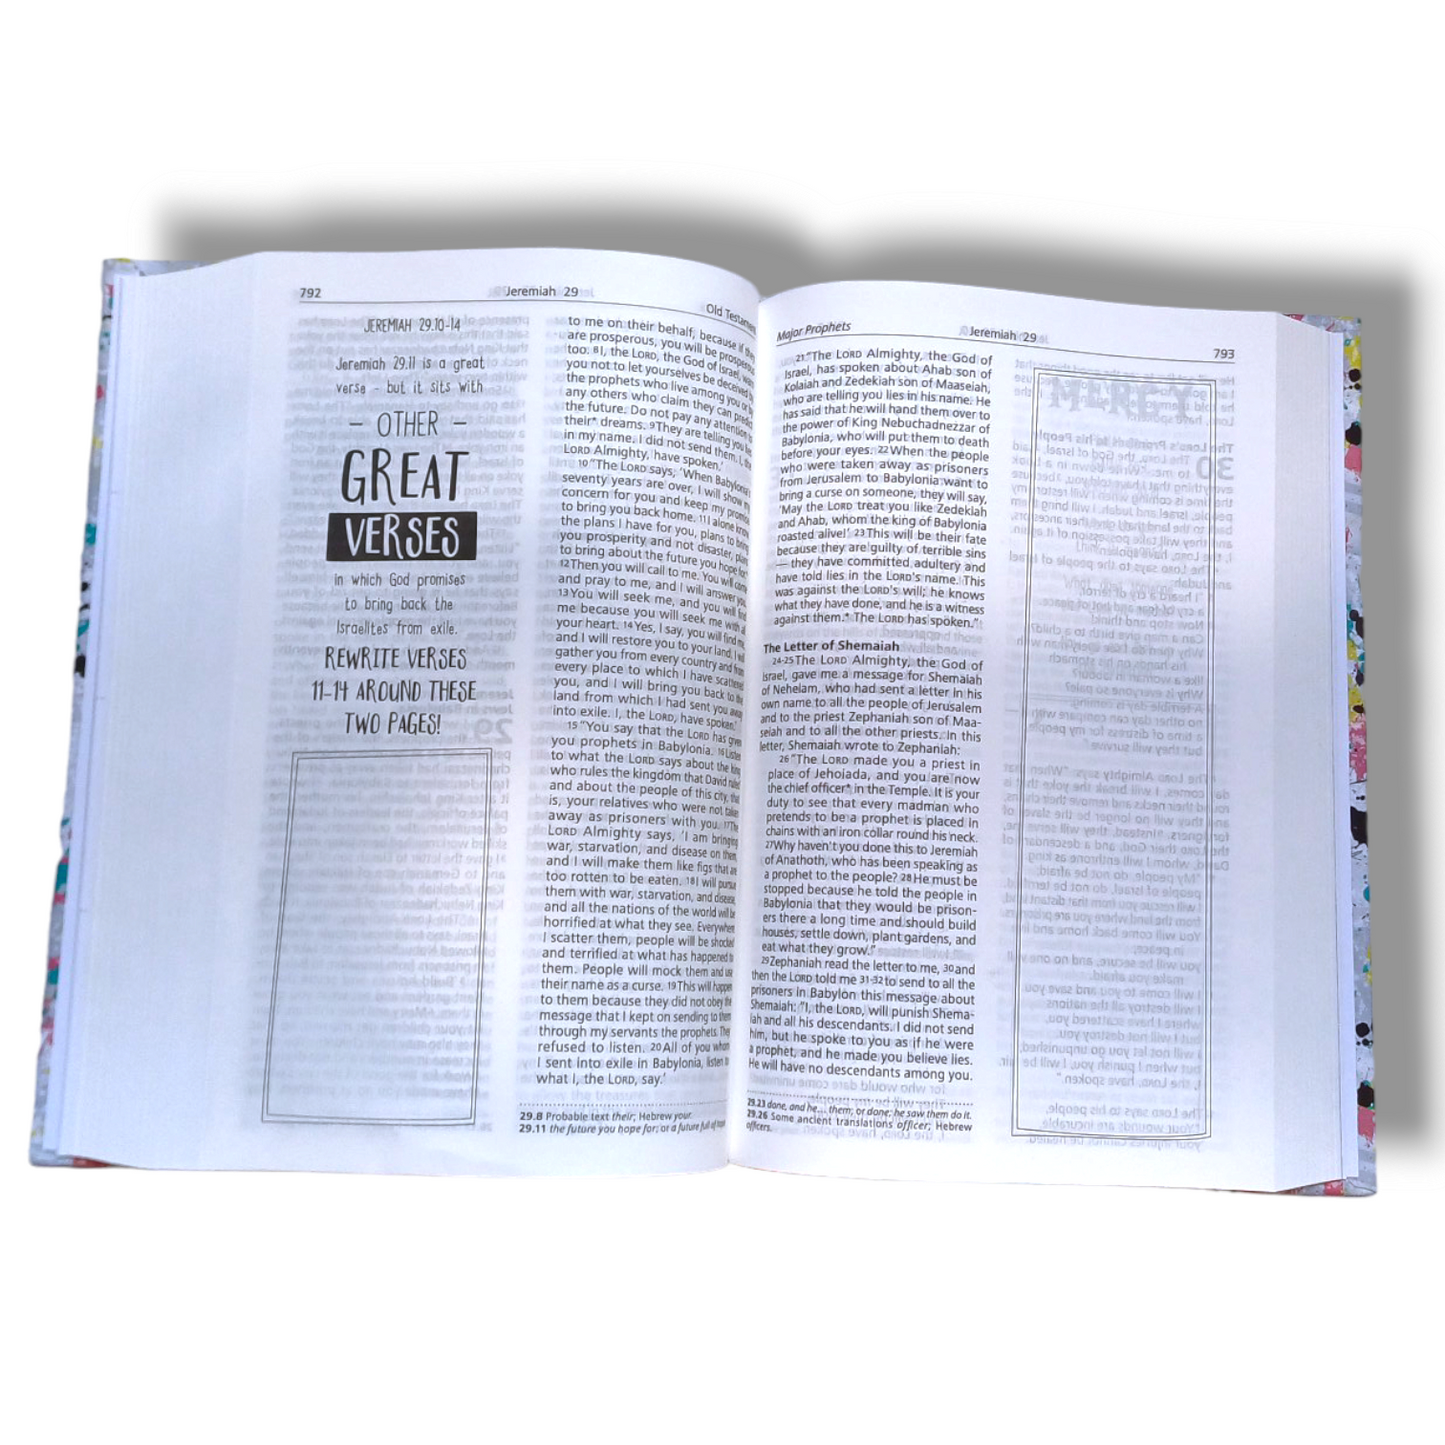 Good News Youth Bible | New Edition | Hard Cover Bound